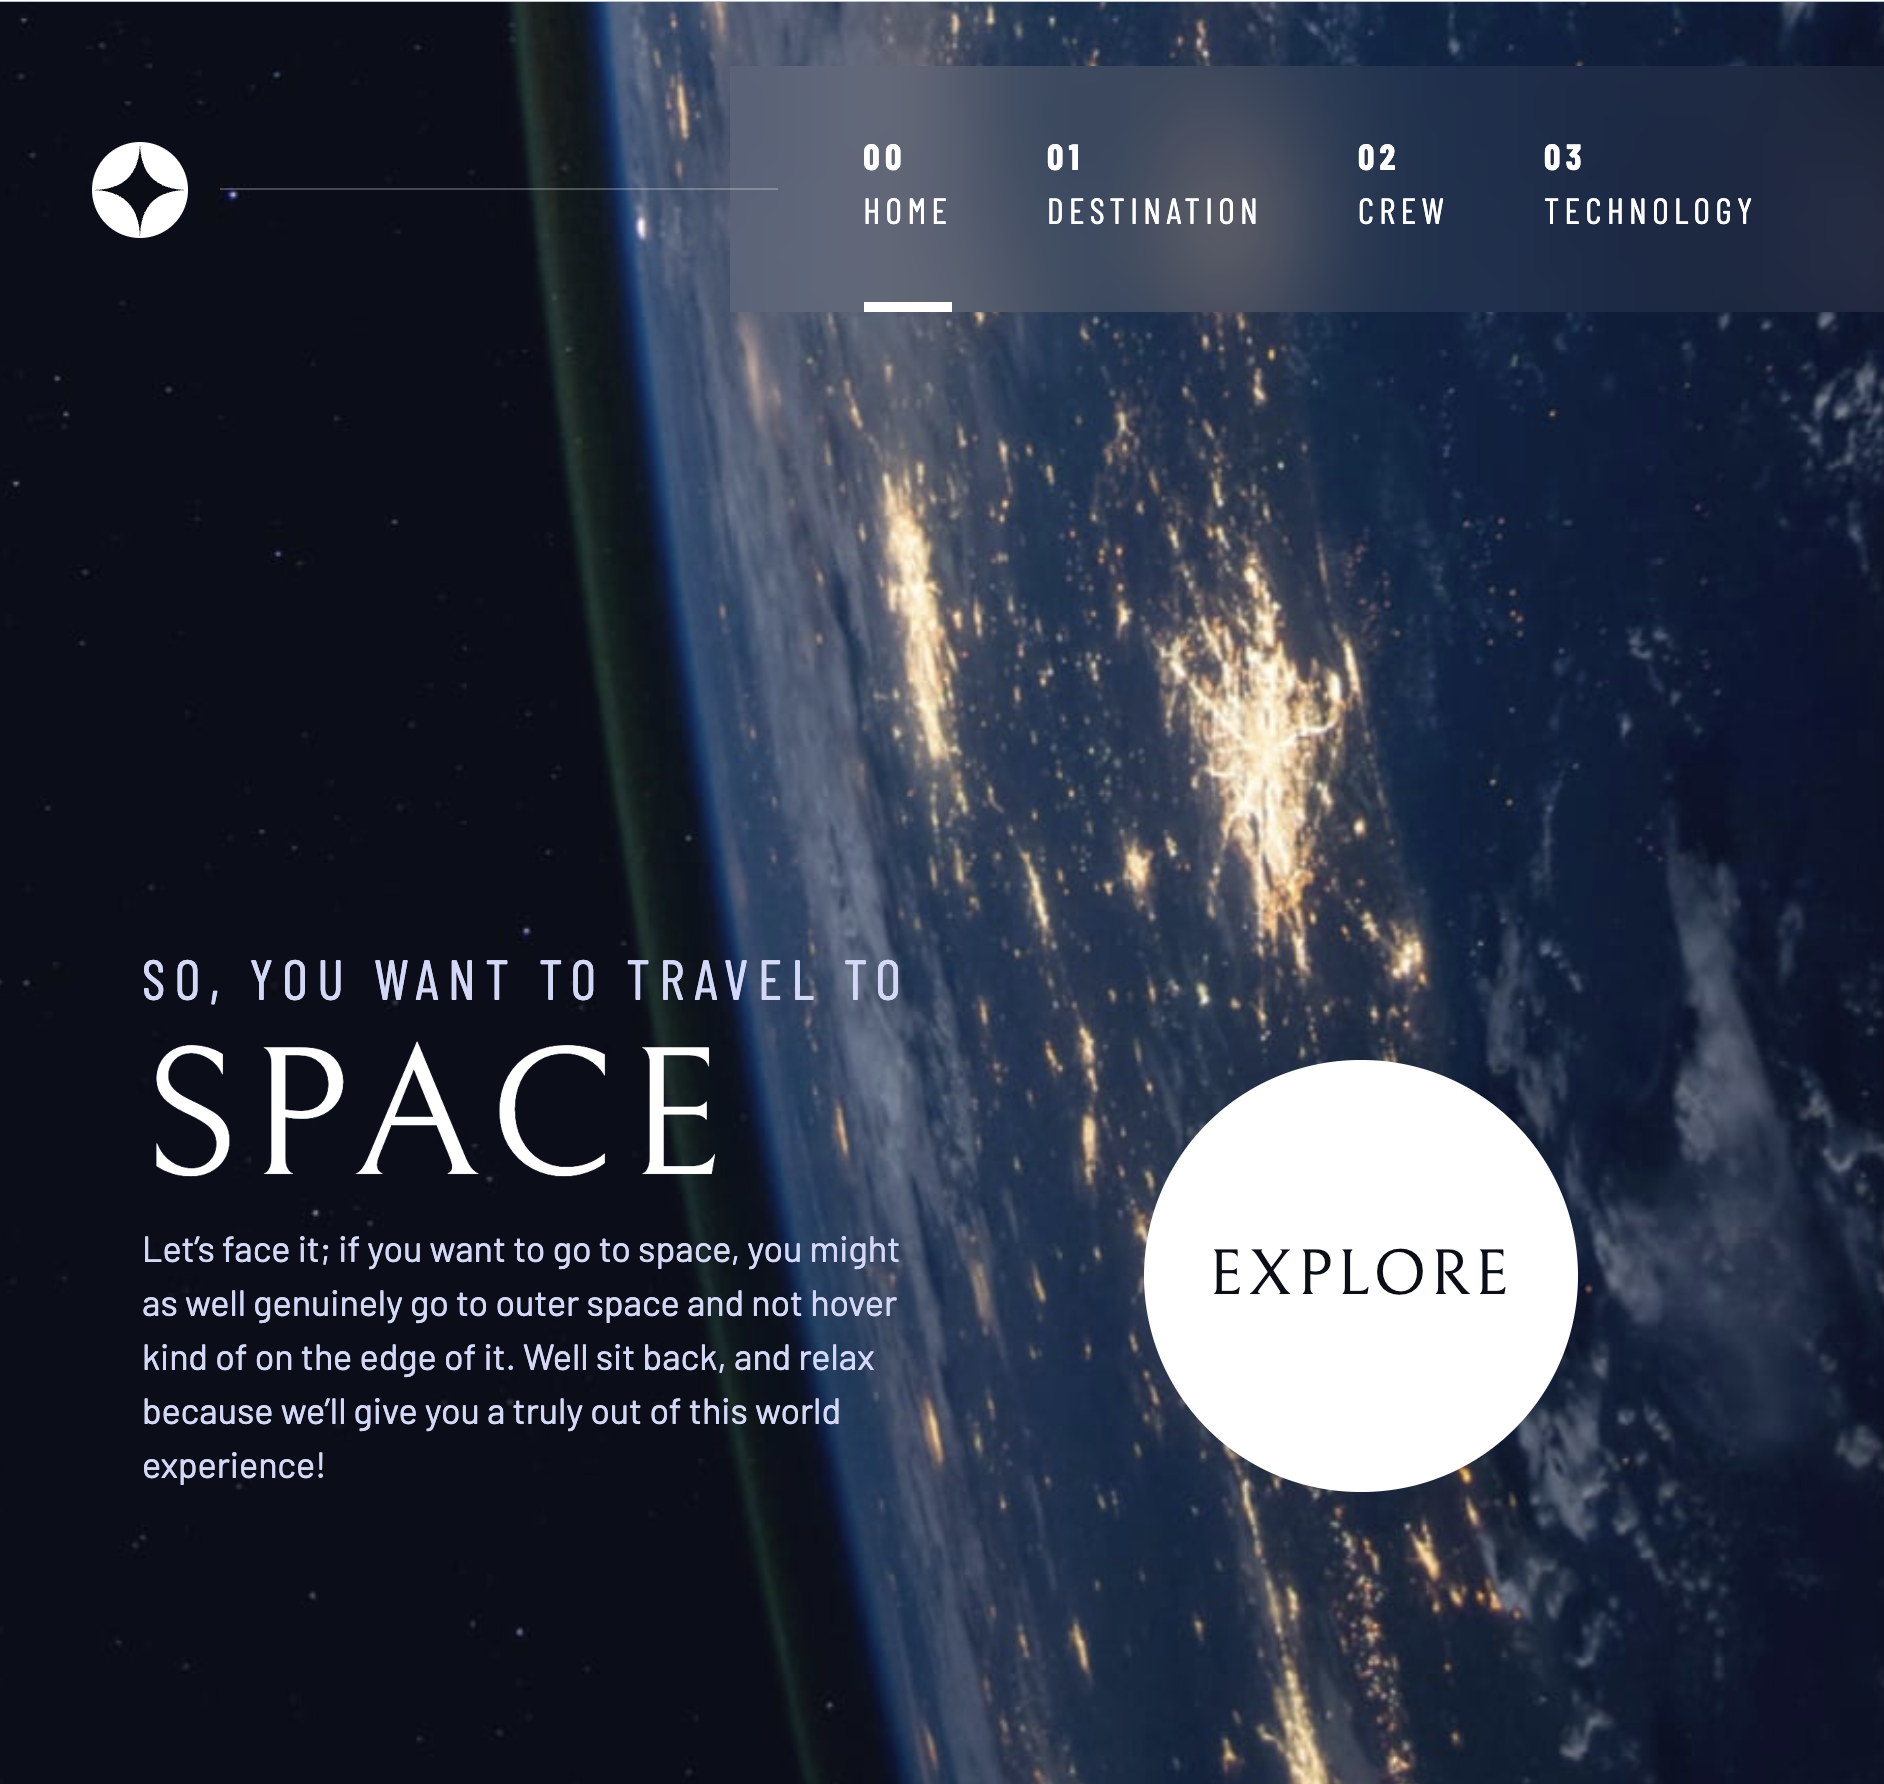 homepage design of Space Tourism